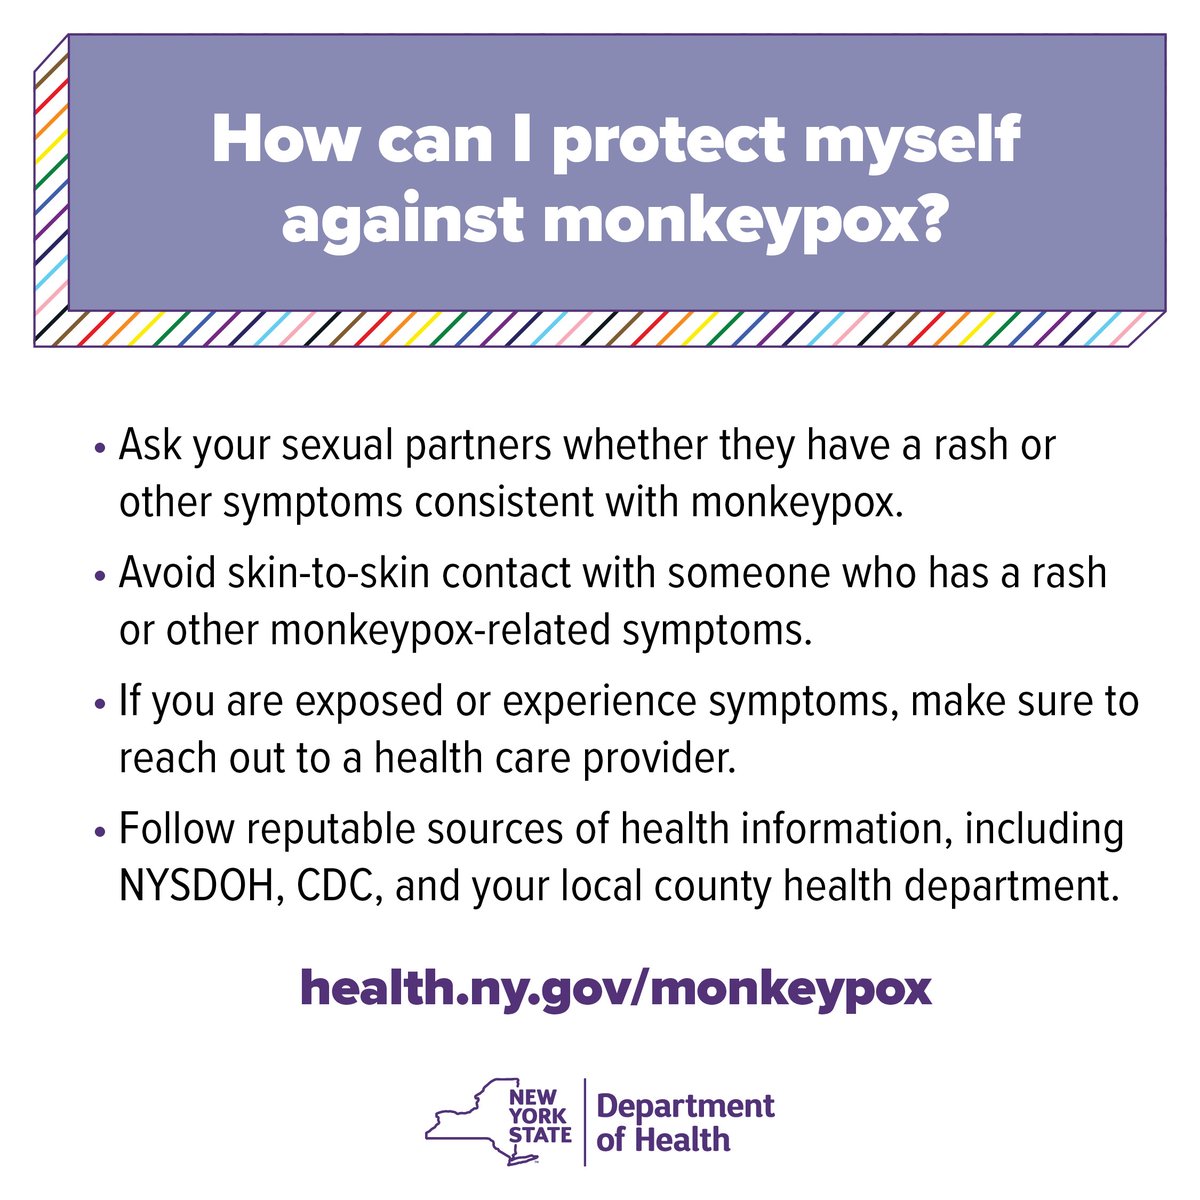 Learn about what you can do to protect yourself against monkeypox. If you are an LHD or health care provider, download our new resources to help educate your community members and patients. health.ny.gov/monkeypox